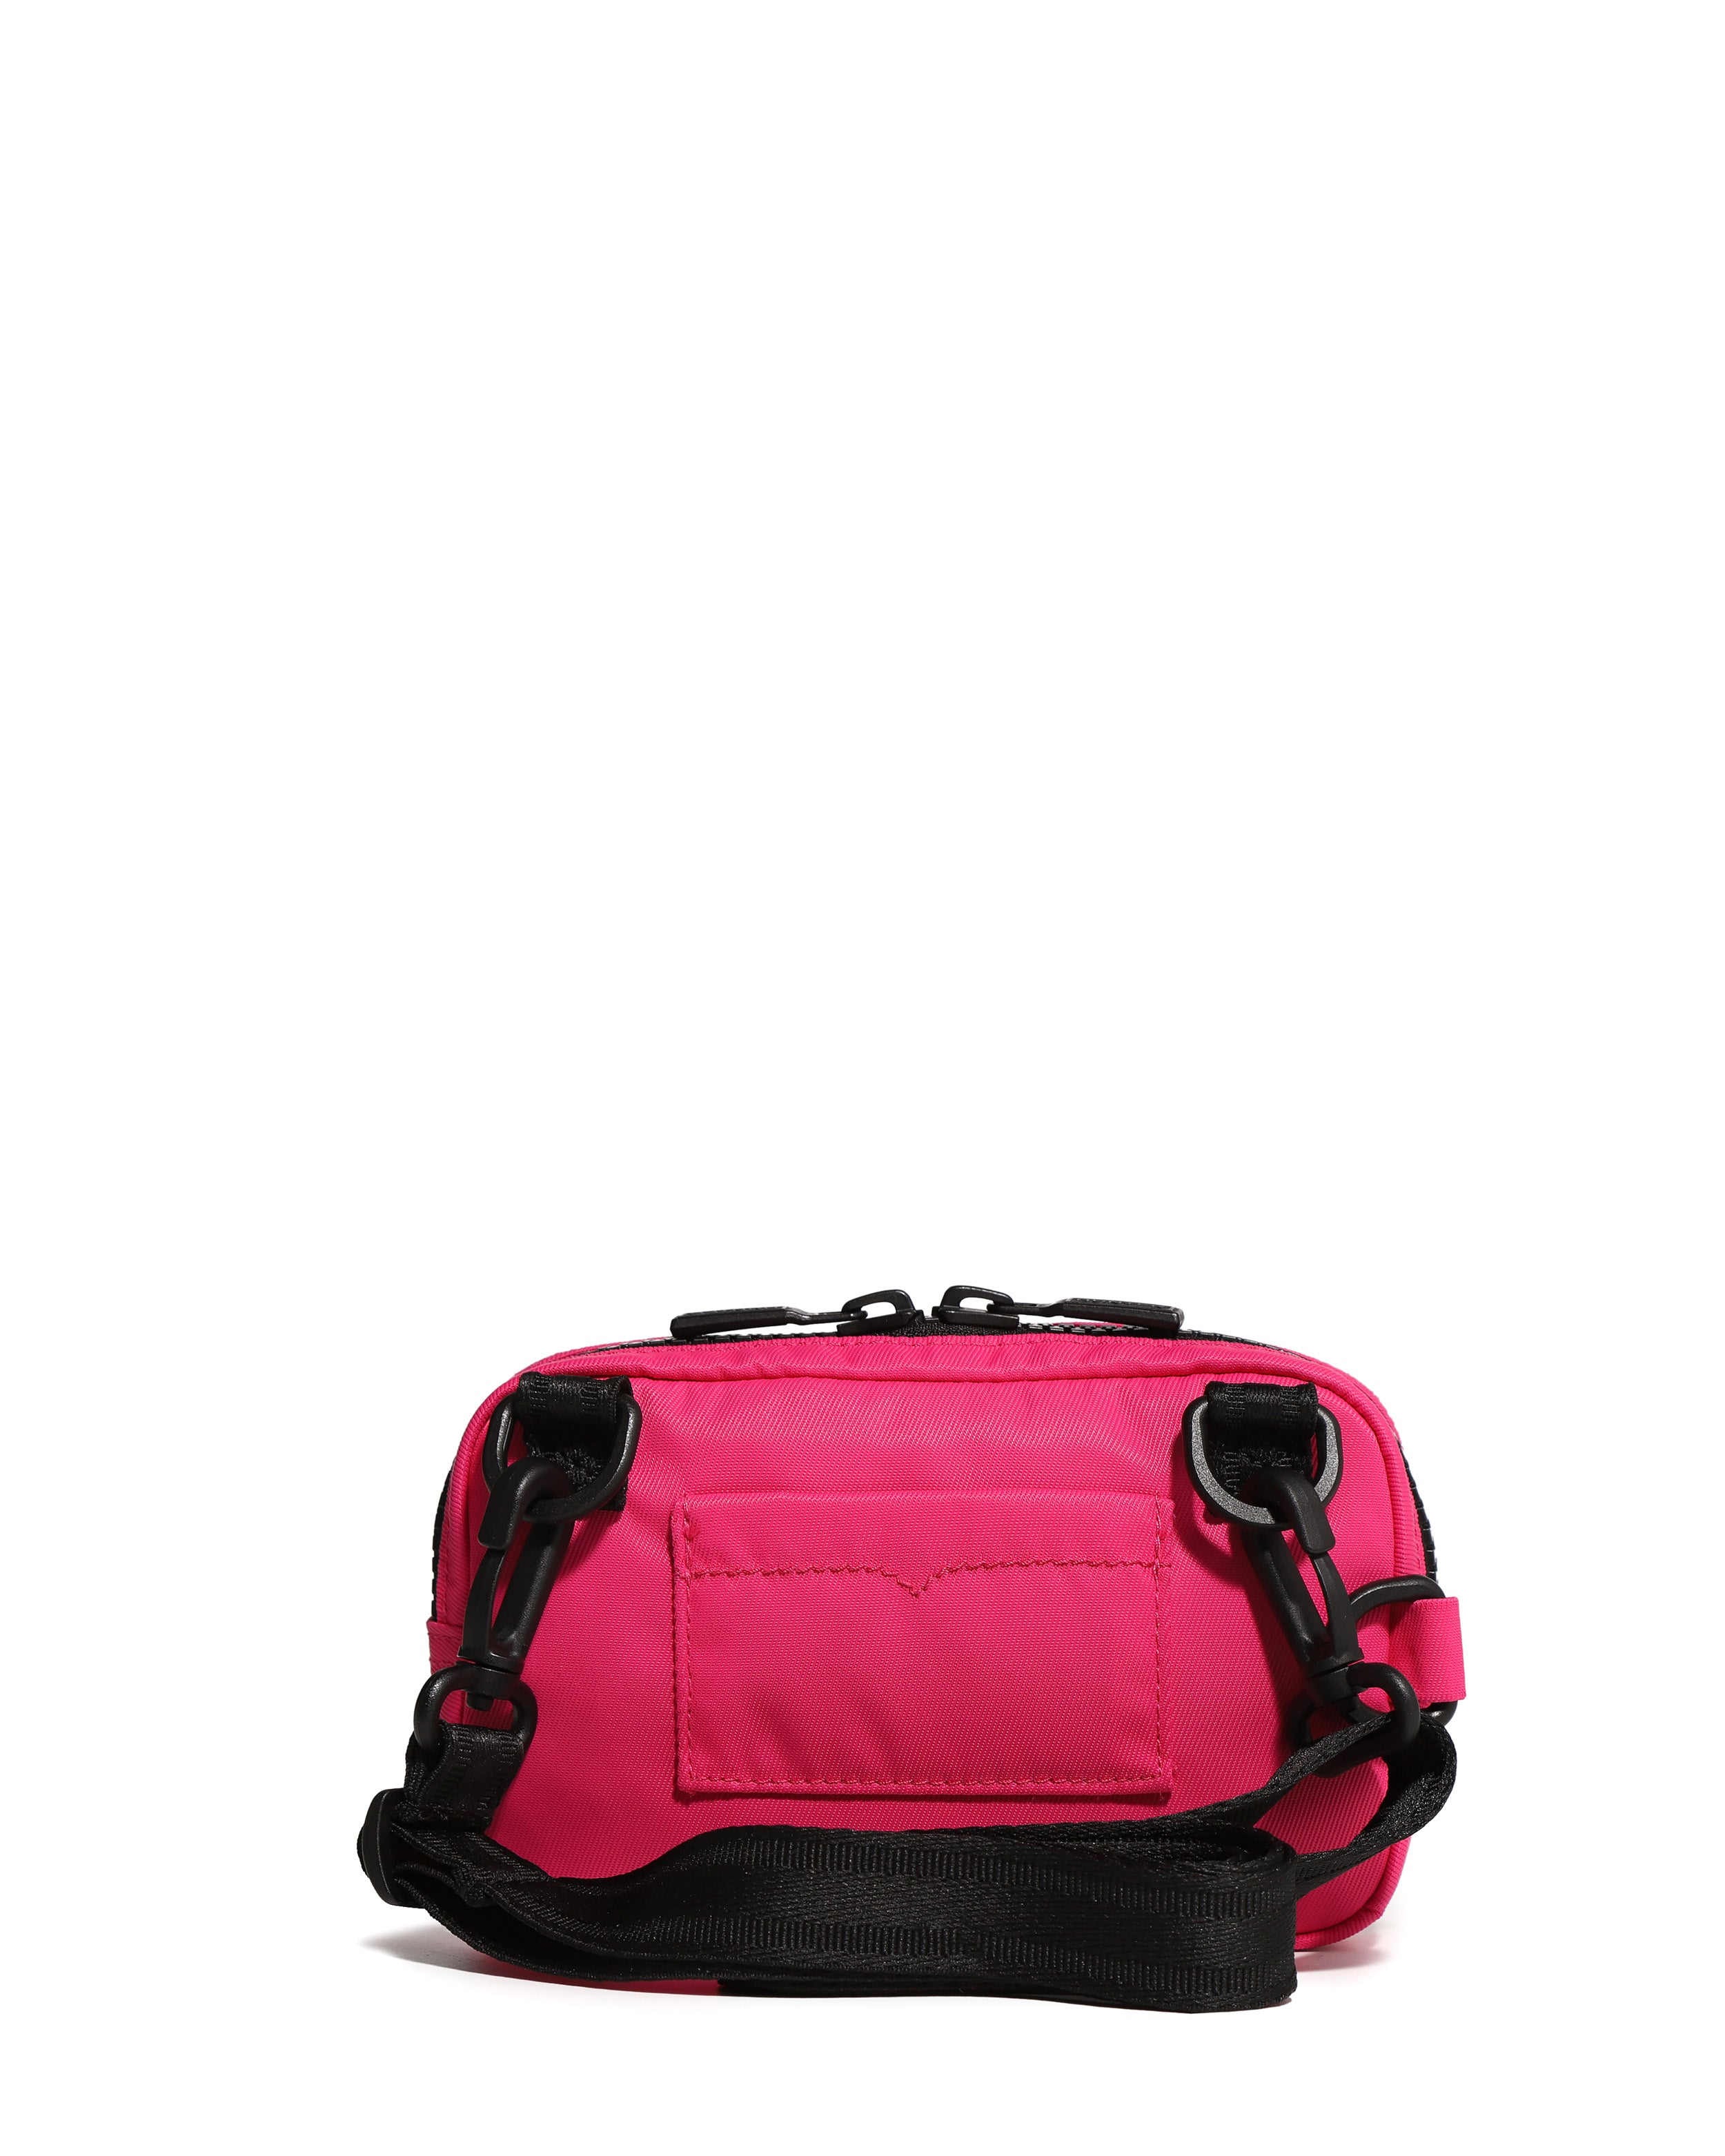 Nylon Keeper Phone Pouch - Magenta Flux